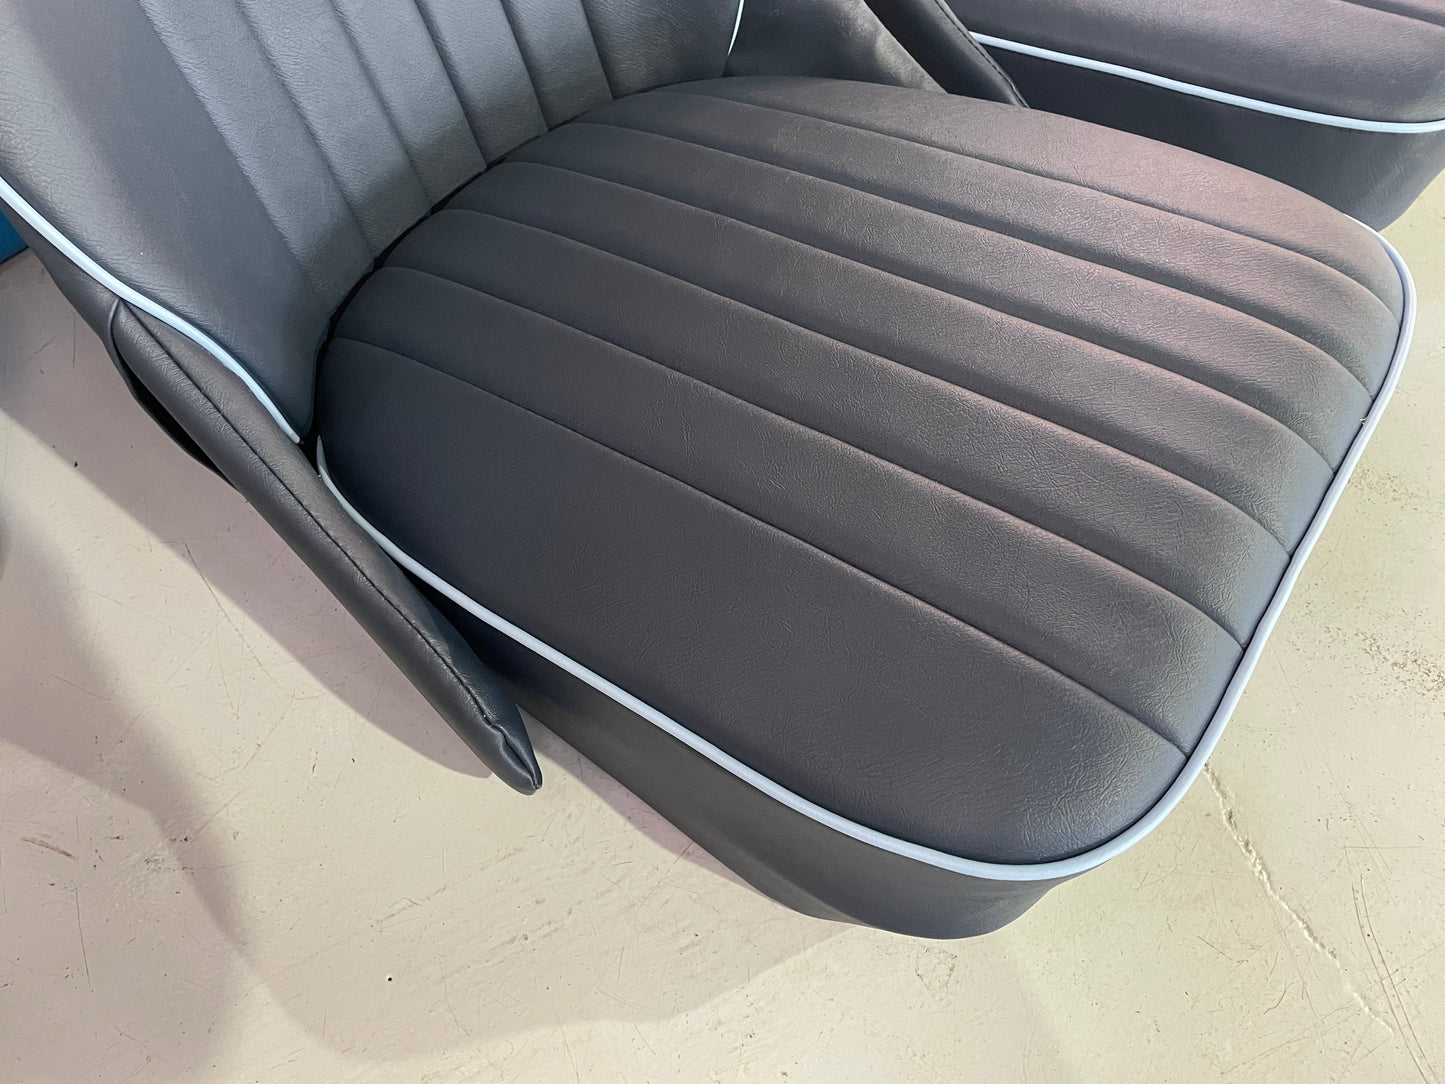 Pair of Complete Upholstered Bugeye Seats with All New Parts